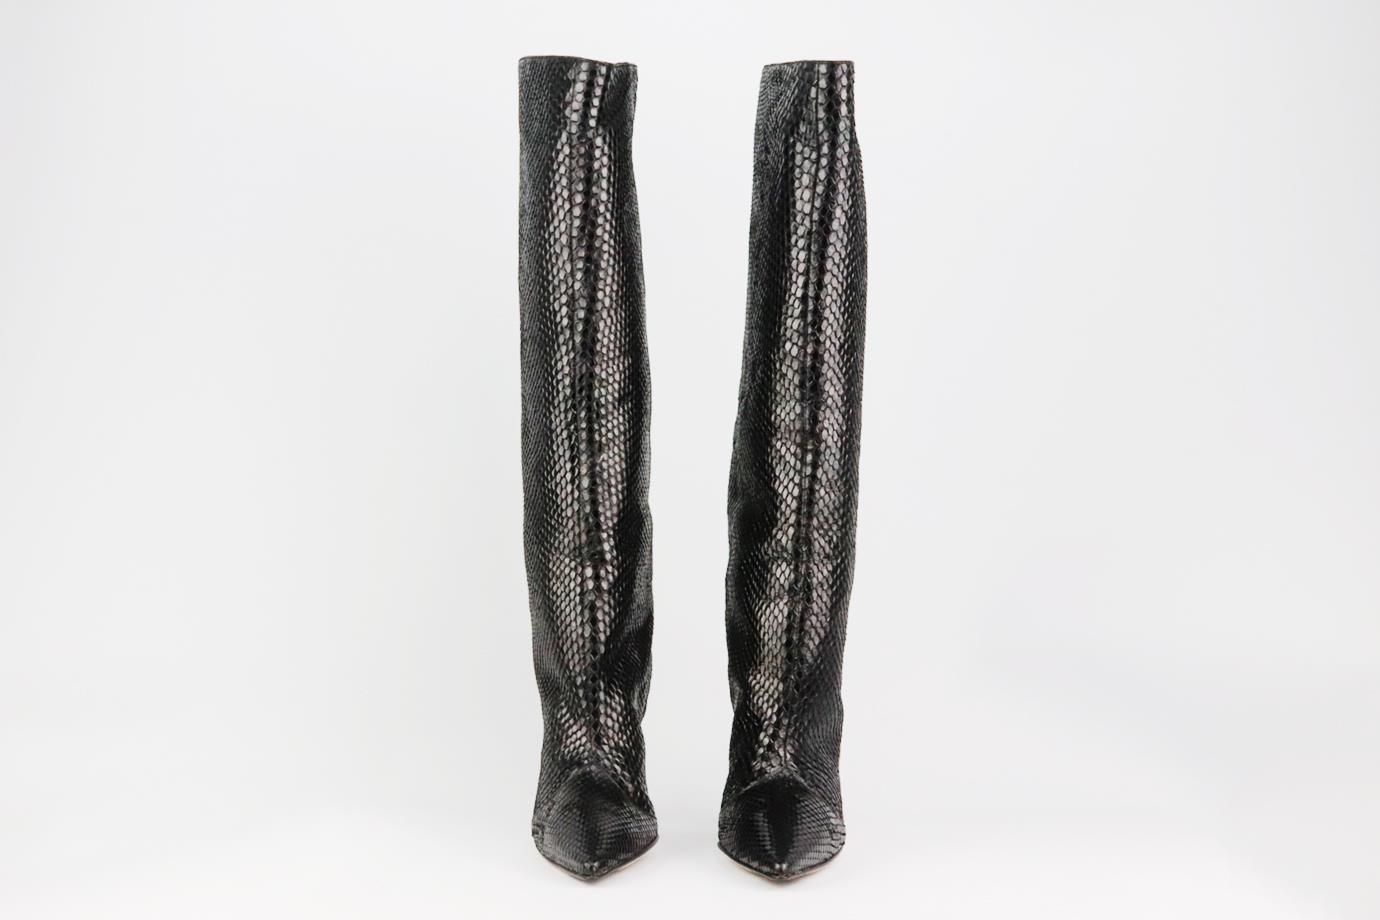 The boots by Jimmy Choo are expertly made in Italy from supple snakeskin, they have flattering pointed toes, the sturdy 85mm heels will give you a little lift but still feel really comfortable to walk in. Heel measures approximately 89 mm/ 3.5 inch.